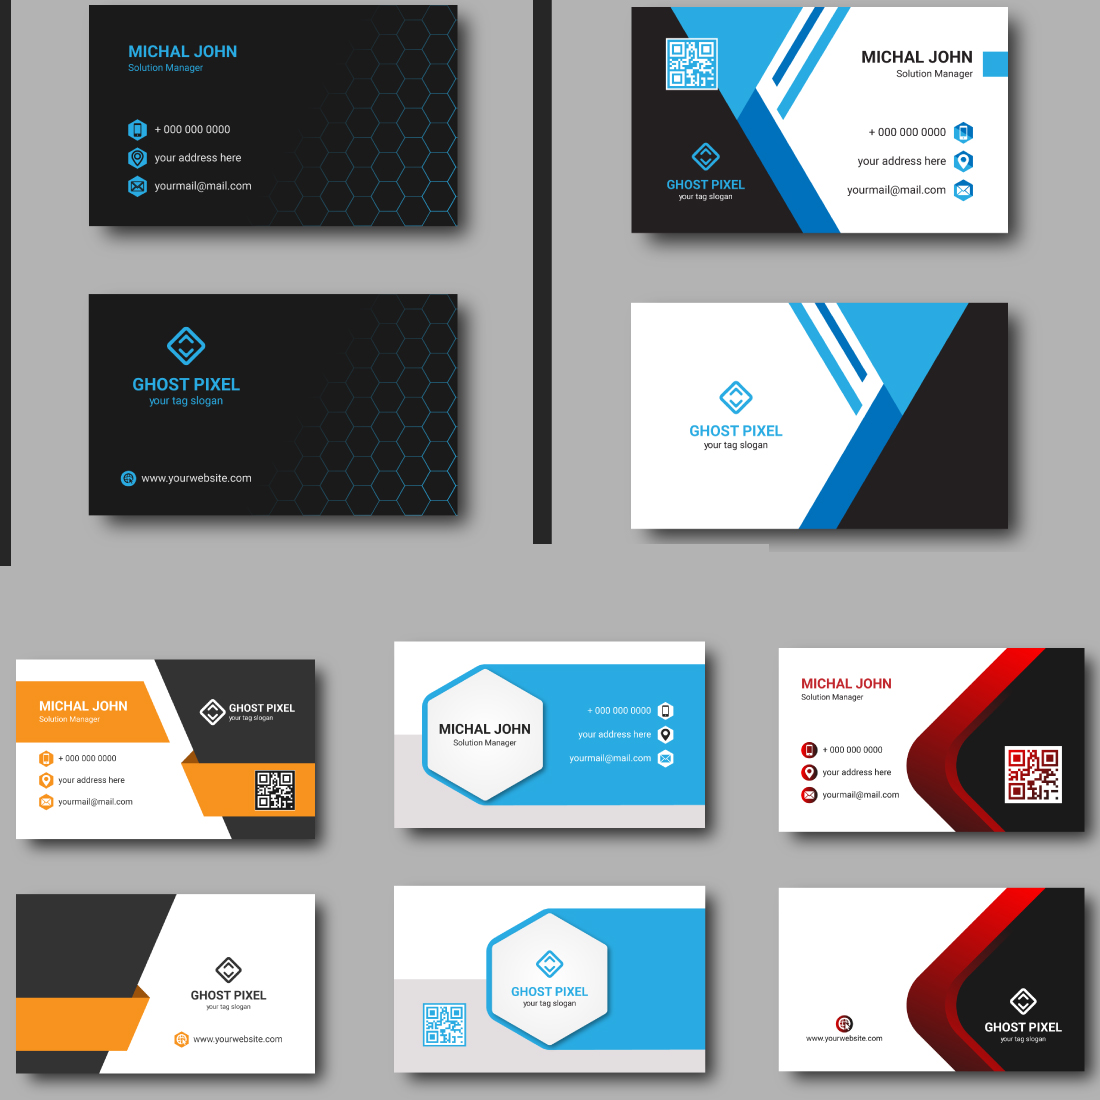 20 New Corporate Business Card Template cover image.